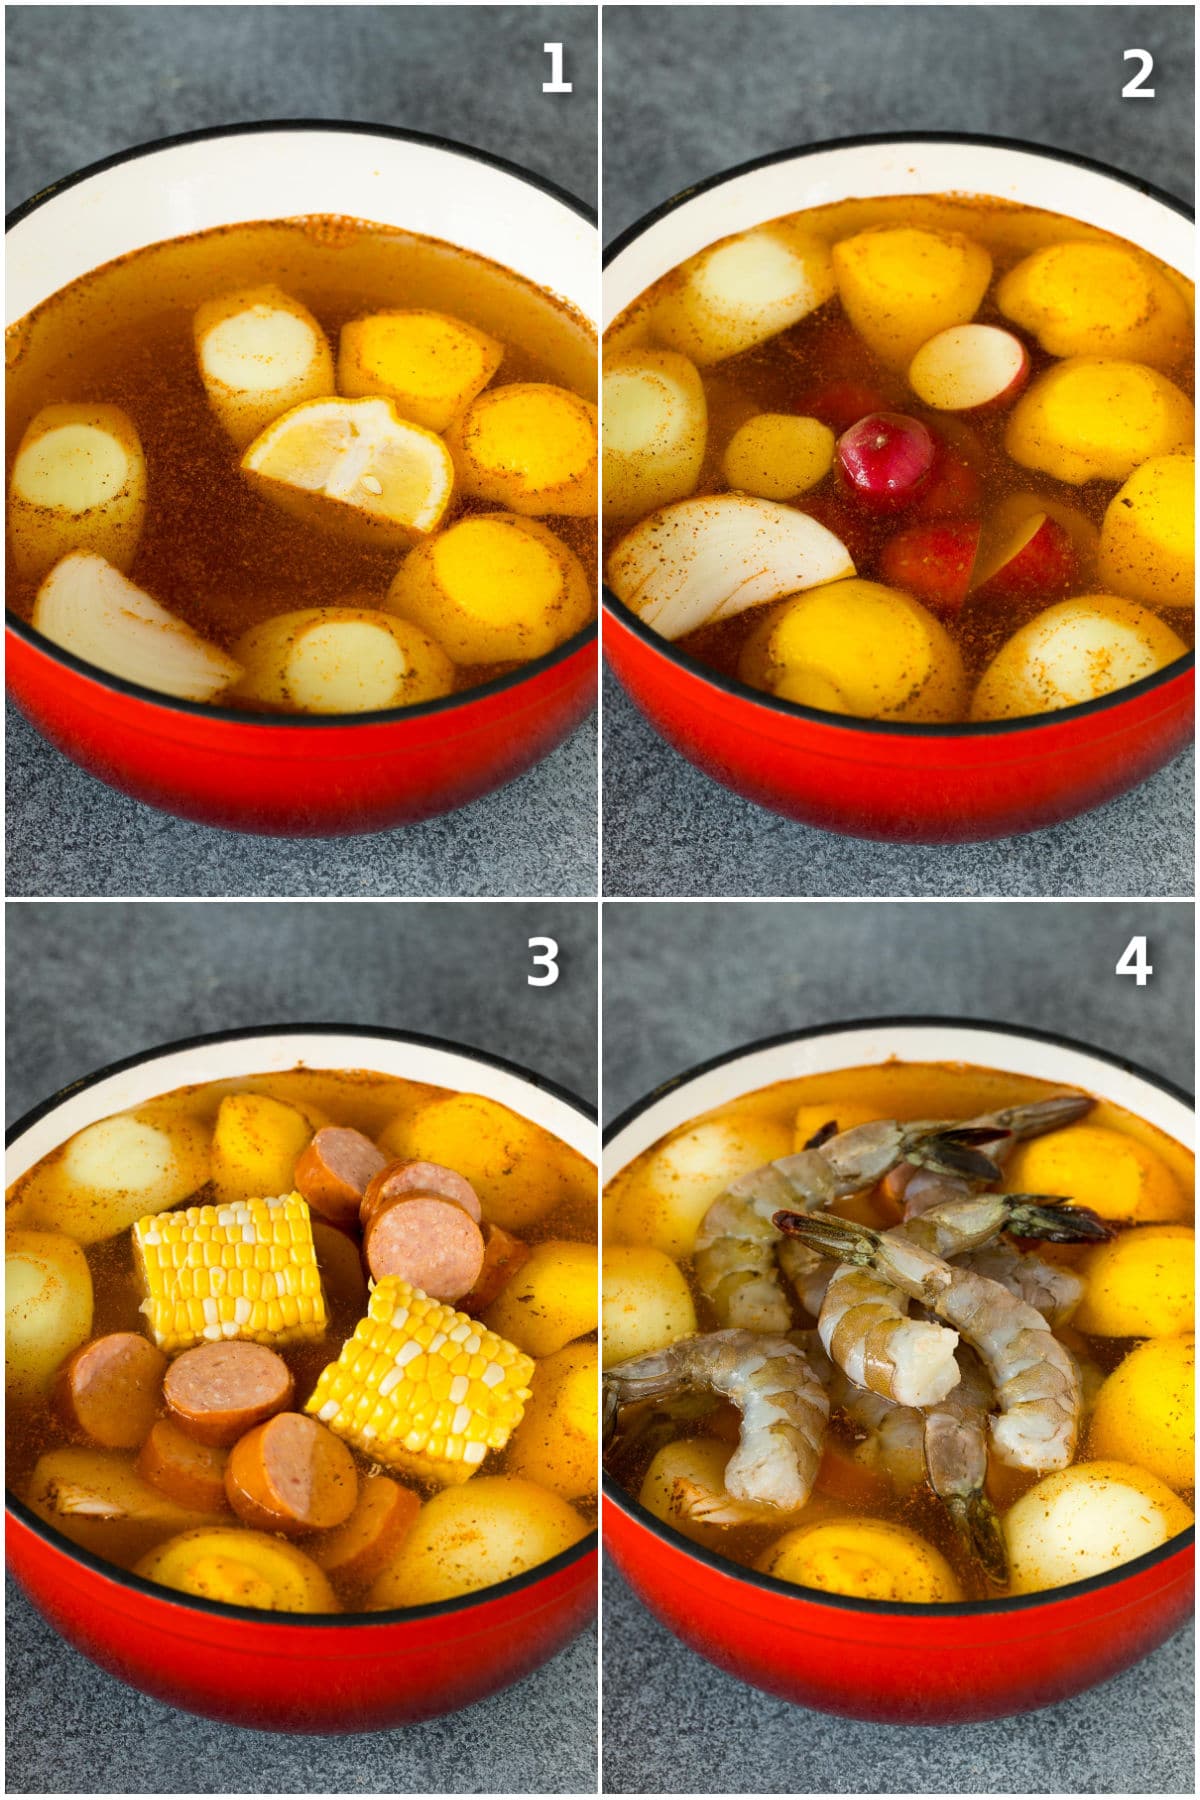 Step by step process shots showing vegetables and shrimp going into a pot of boiling liquid.